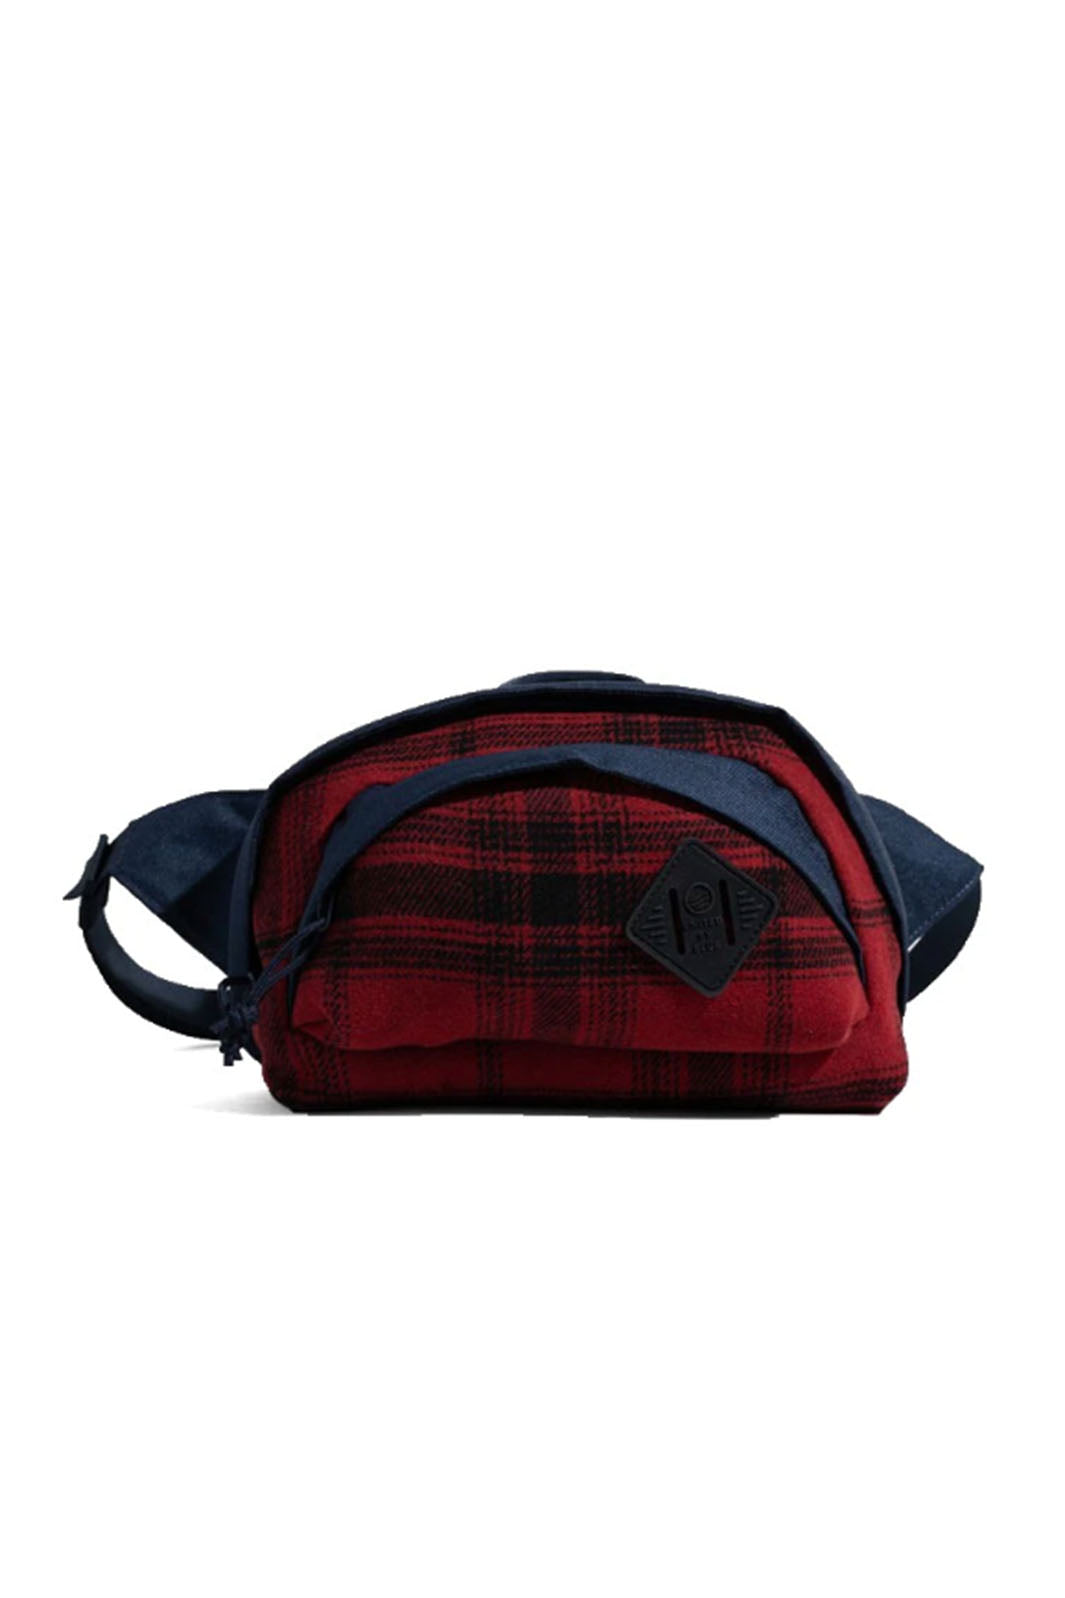 Marine Layer Archive Puffer Fanny Pack Arctic Ice